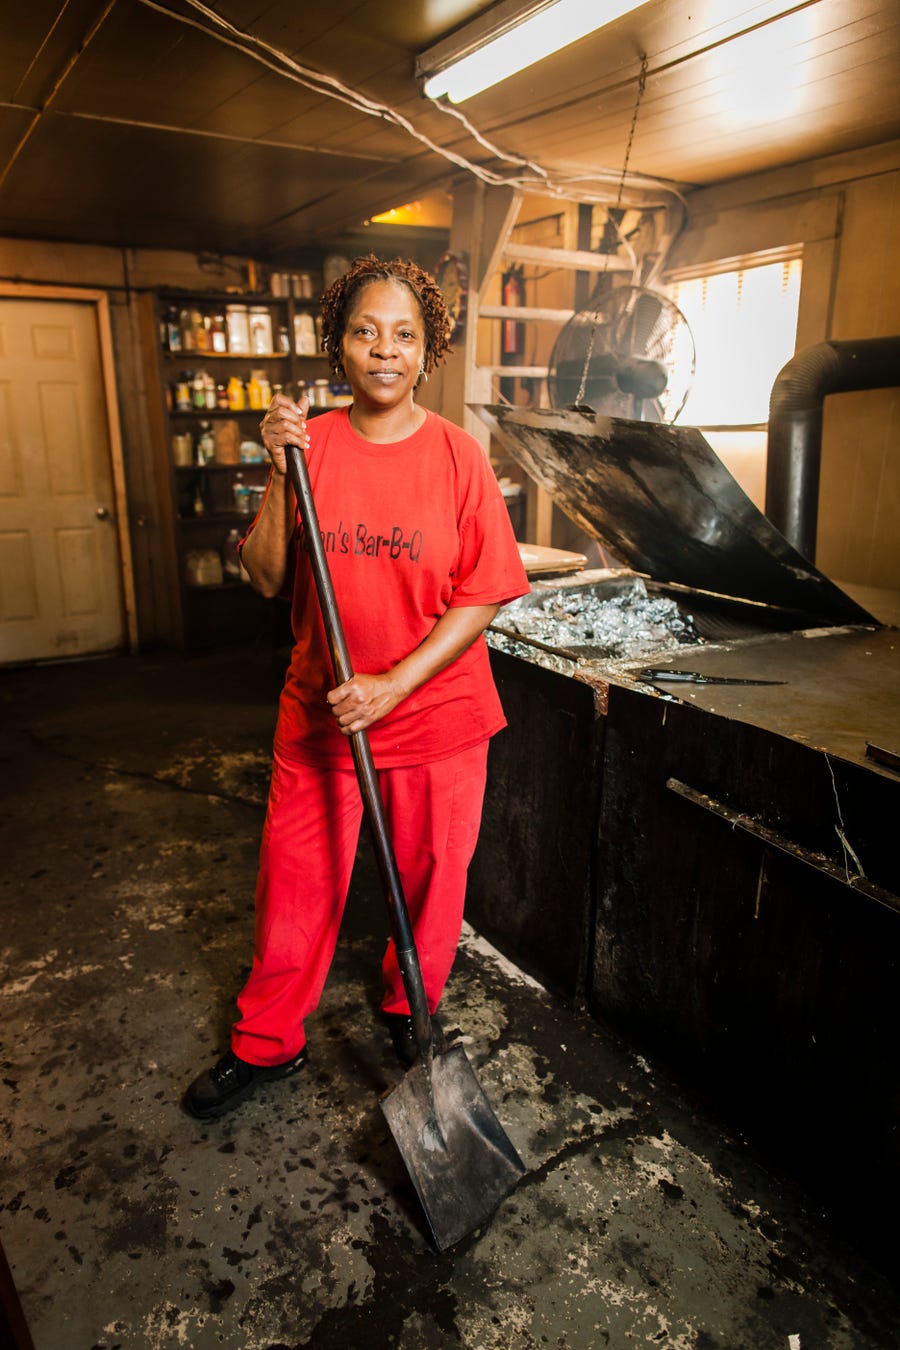 Helen Turner, owner and pitmaster of Helen's Bar-B-Q in Brownsville, Tenn., was featured in Southern Living magazine as one of the most influential women in barbecue.